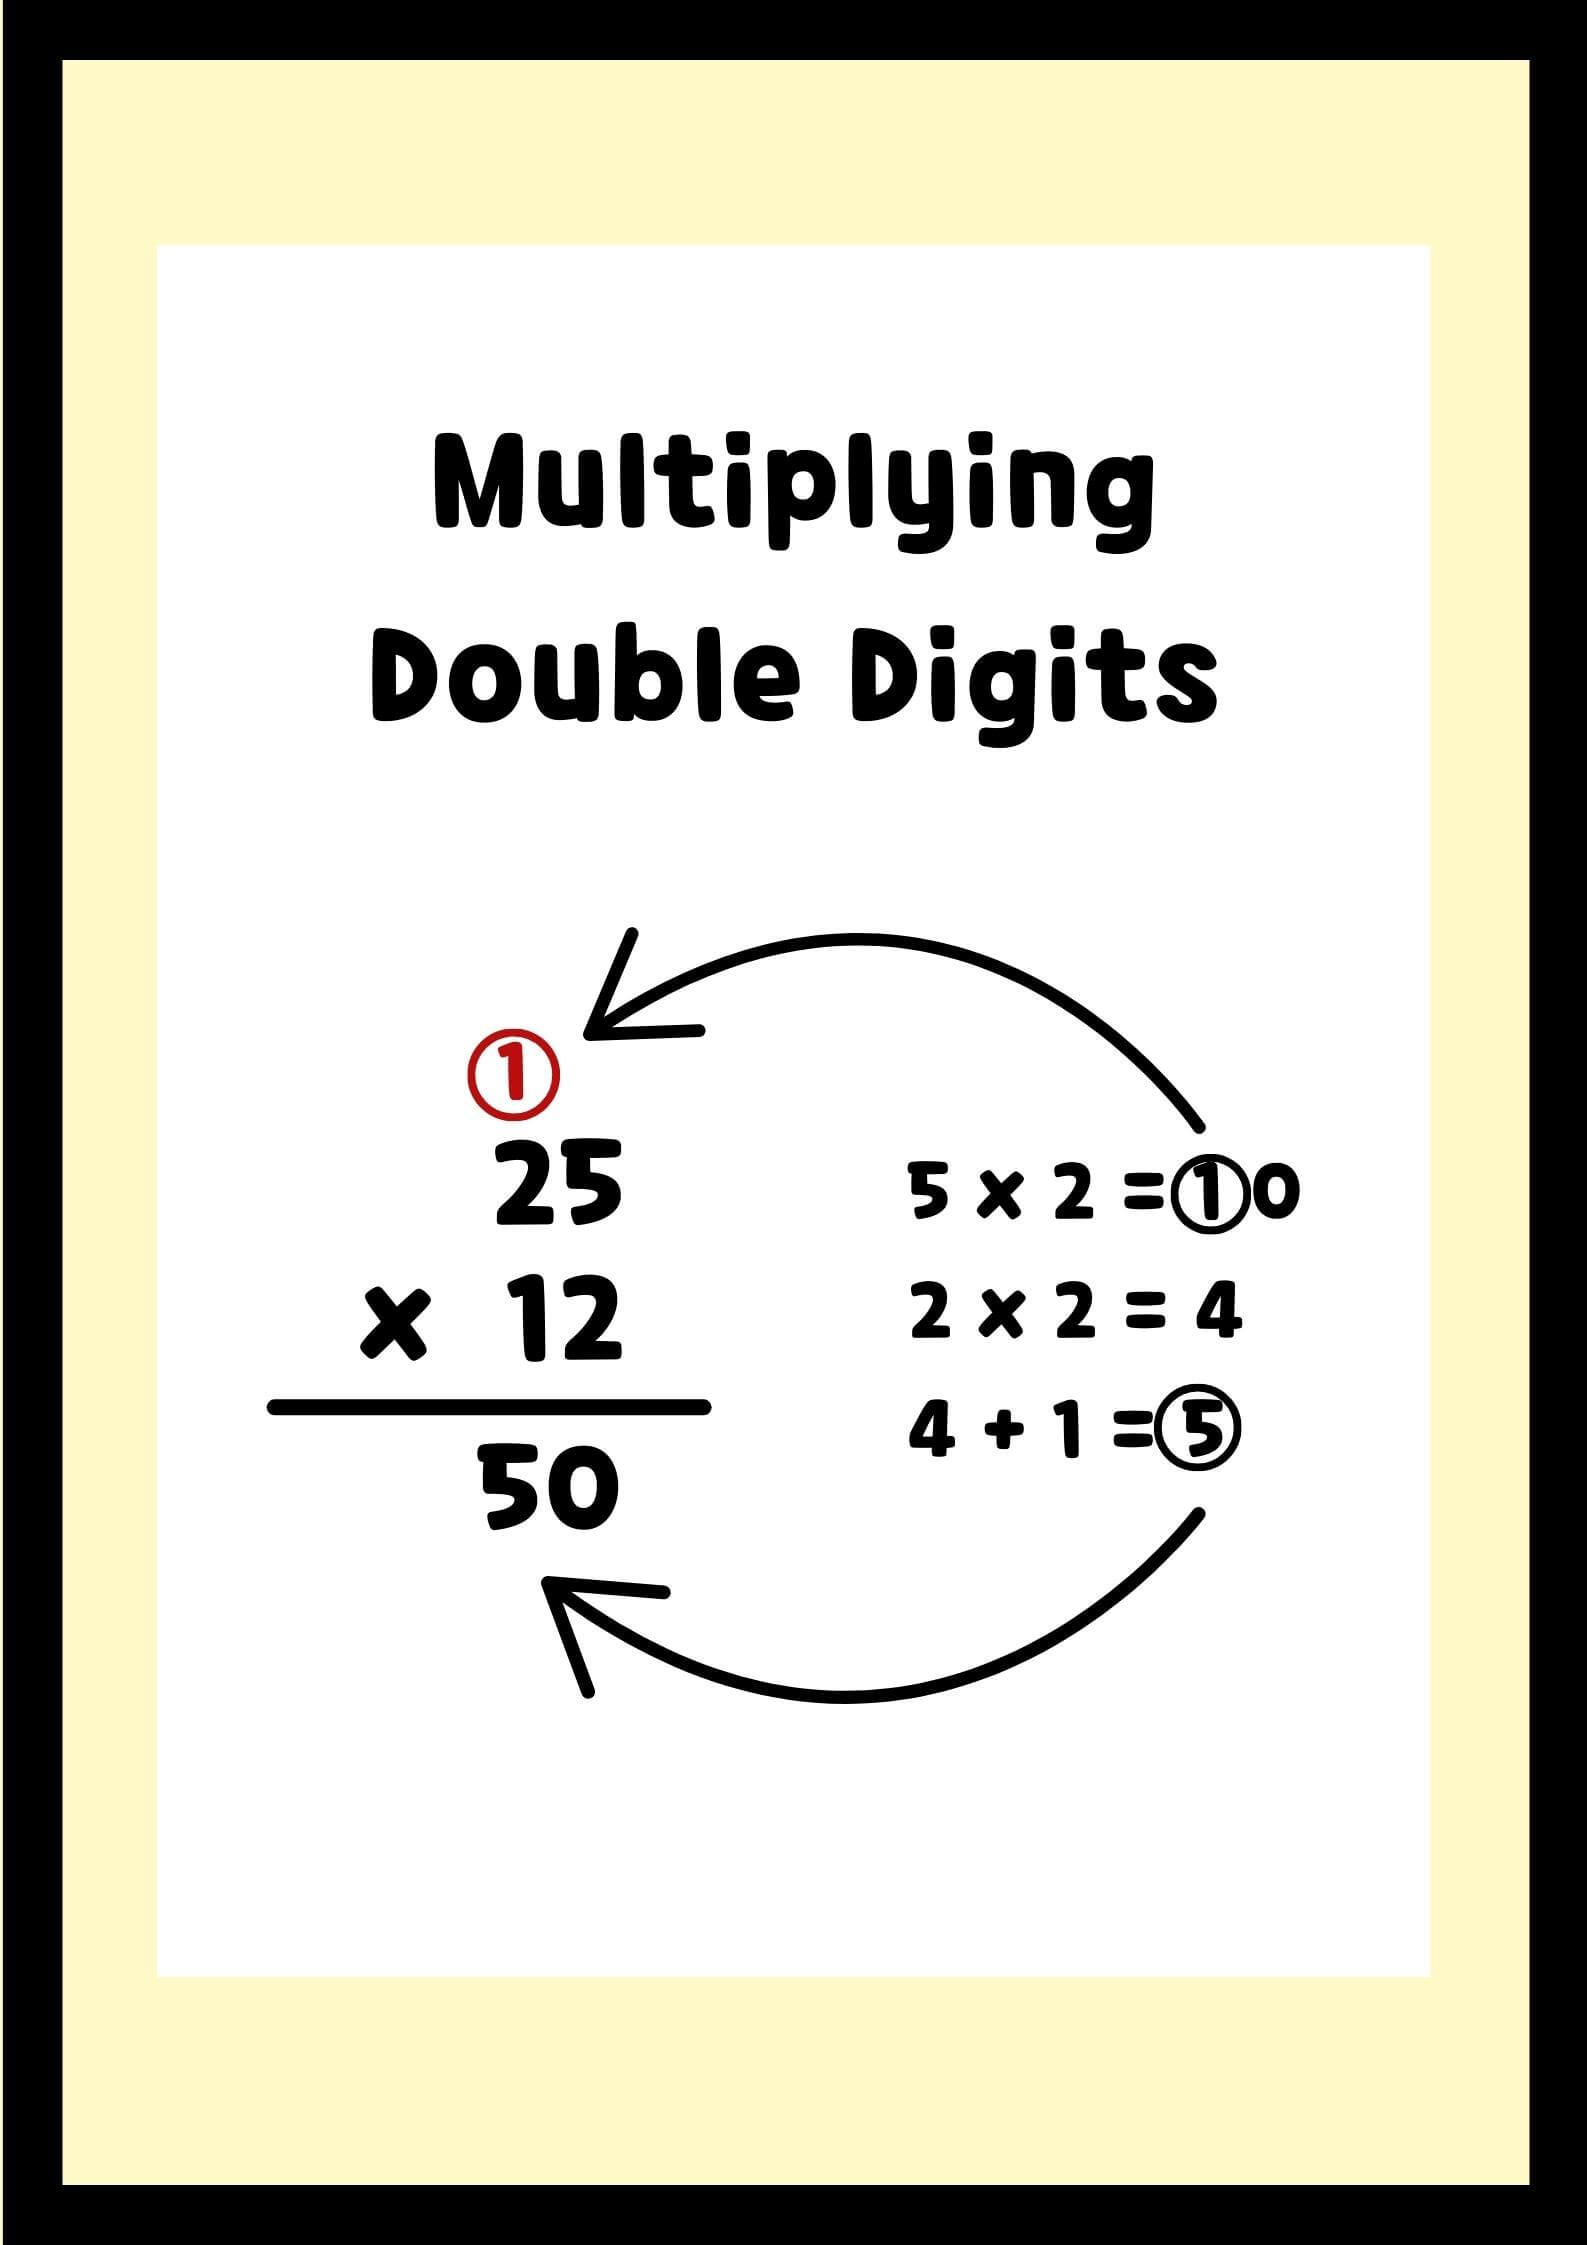 number breakdowns of multiplying double digits